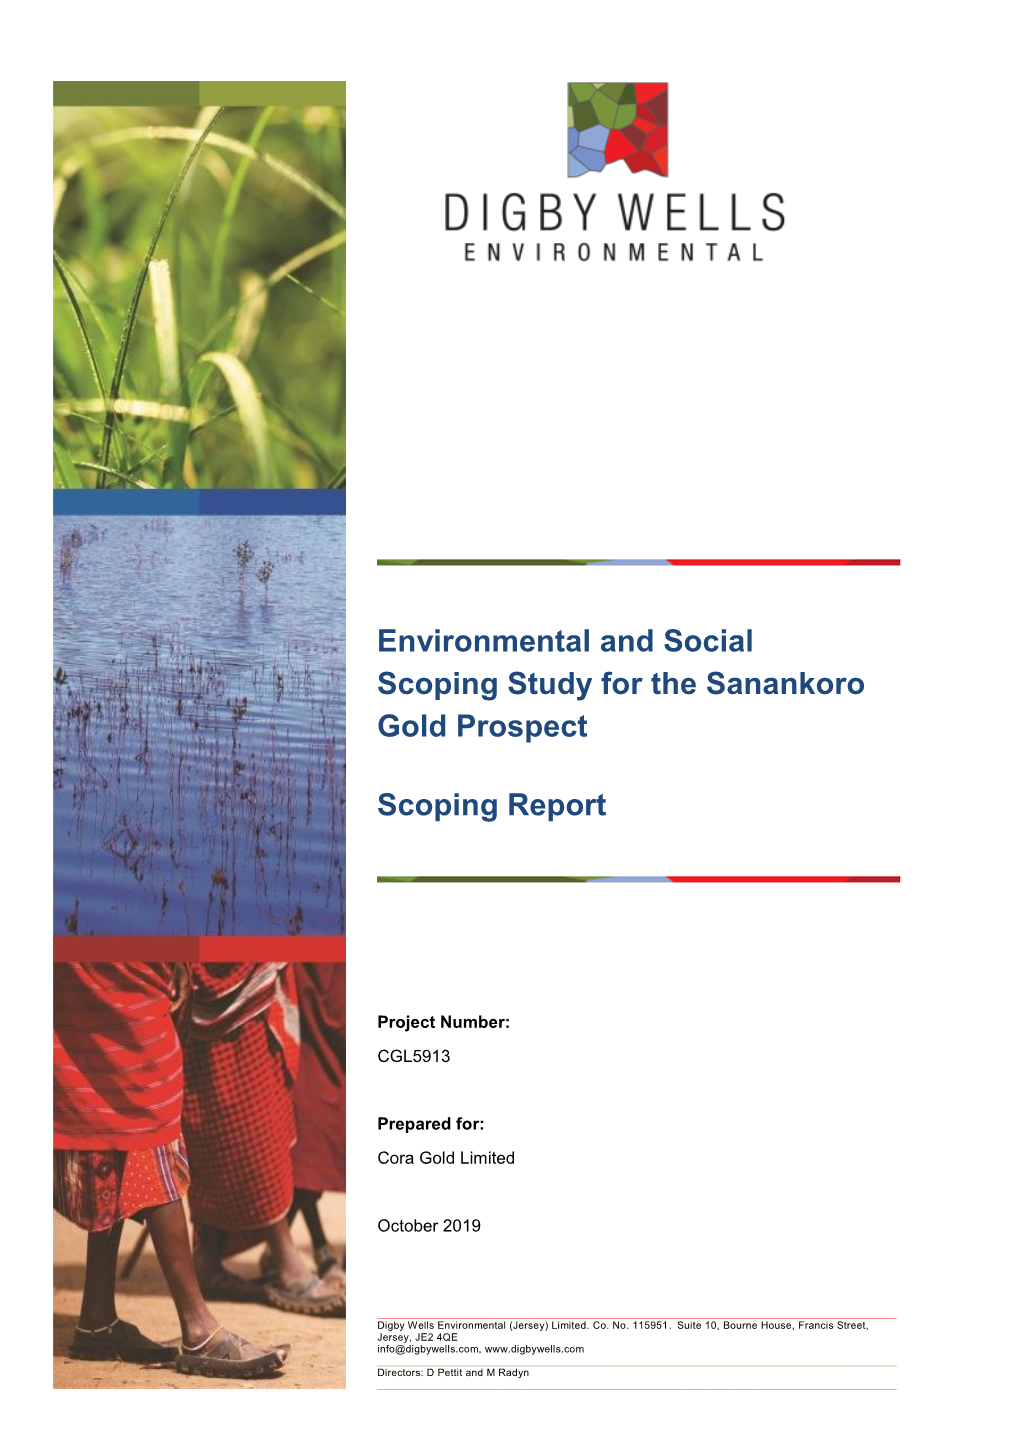 Environmental and Social Scoping Study for the Sanankoro Gold Prospect